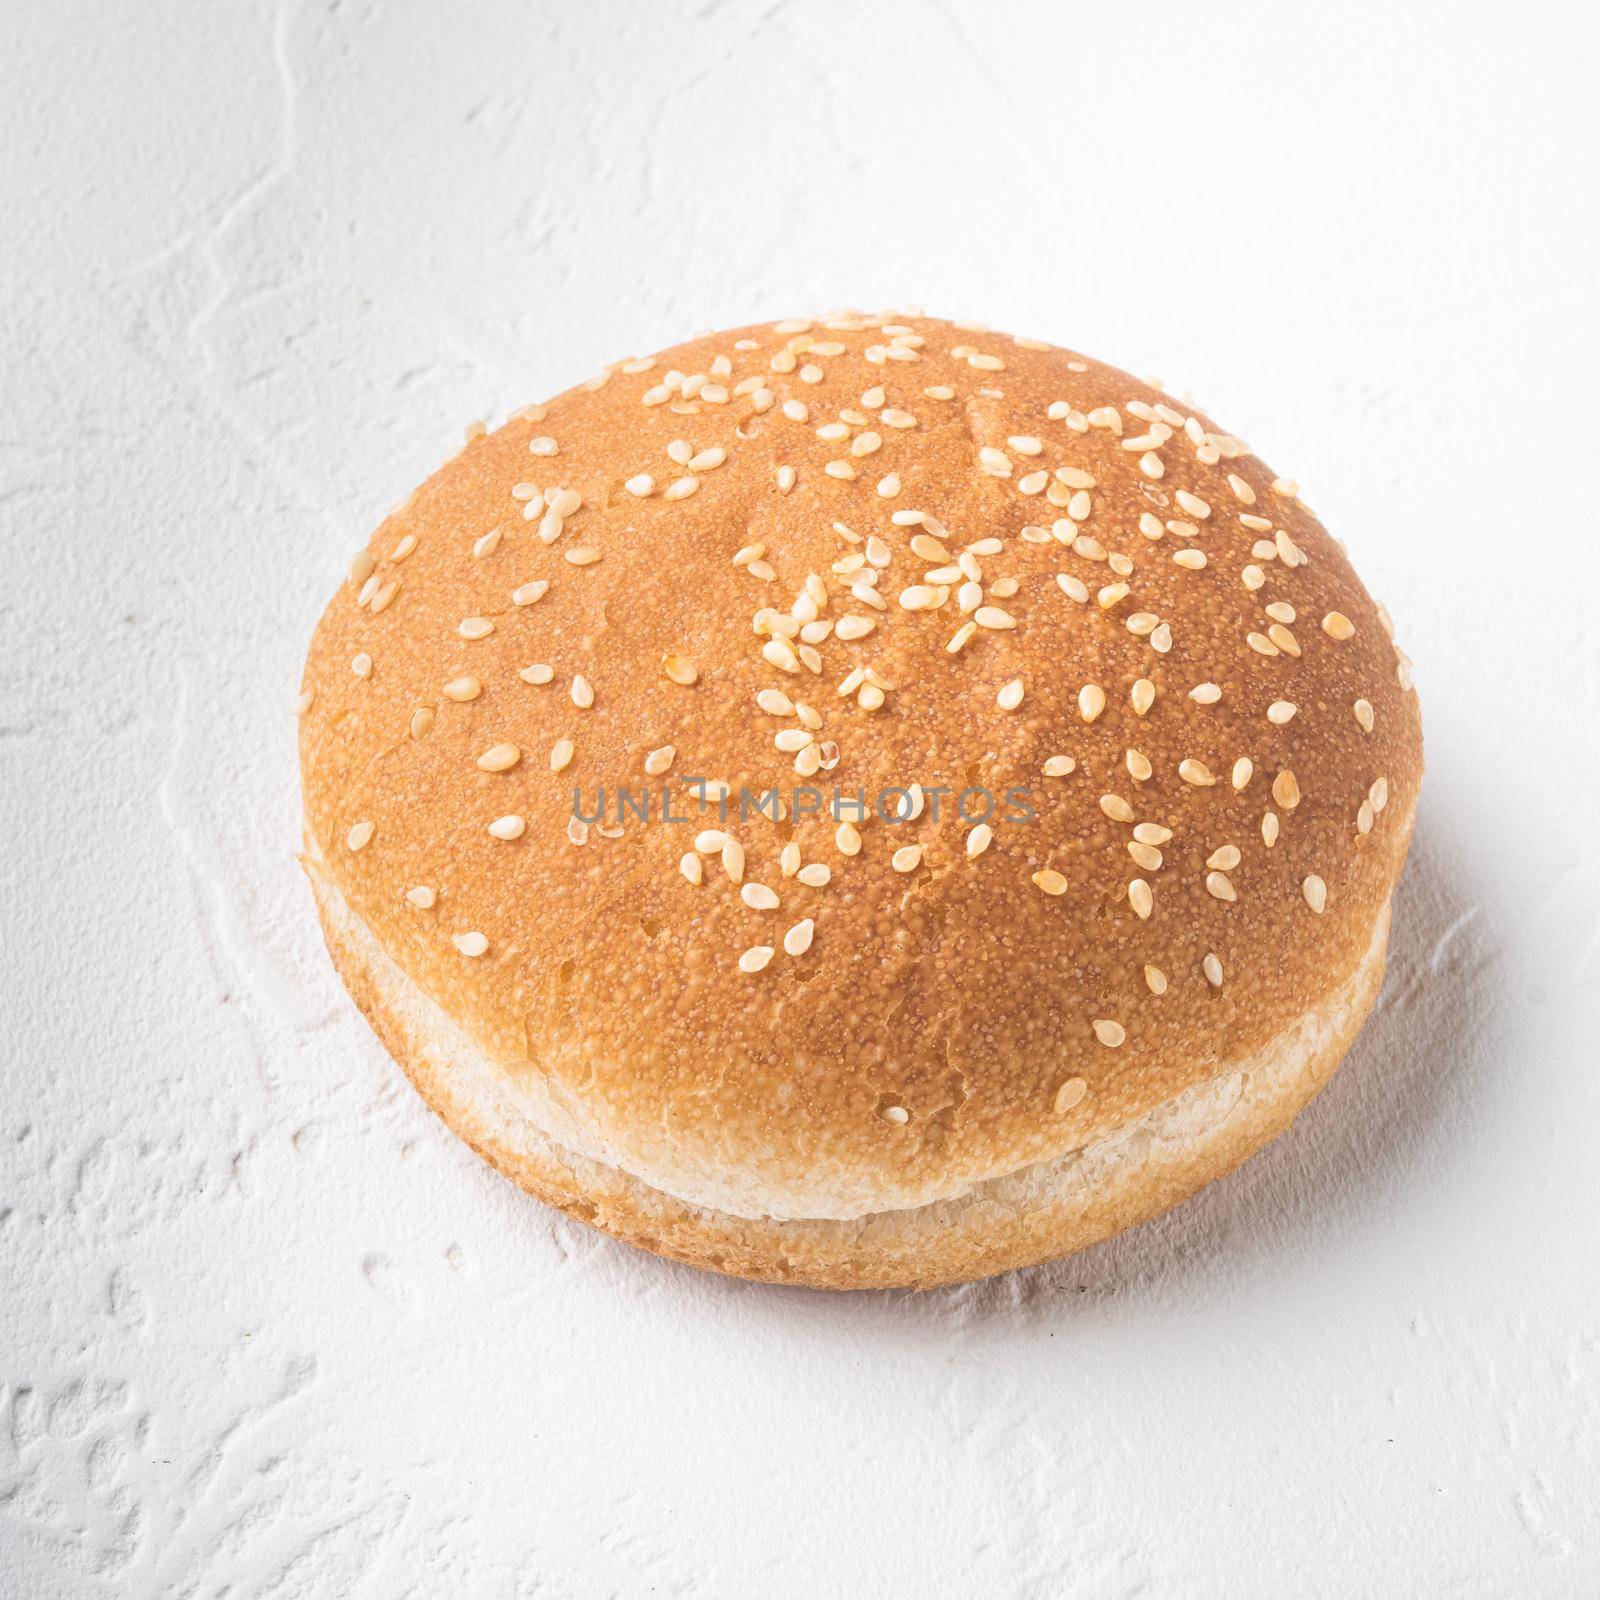 Fresh homemade burger buns with sesame, square format, on white stone background by Ilianesolenyi